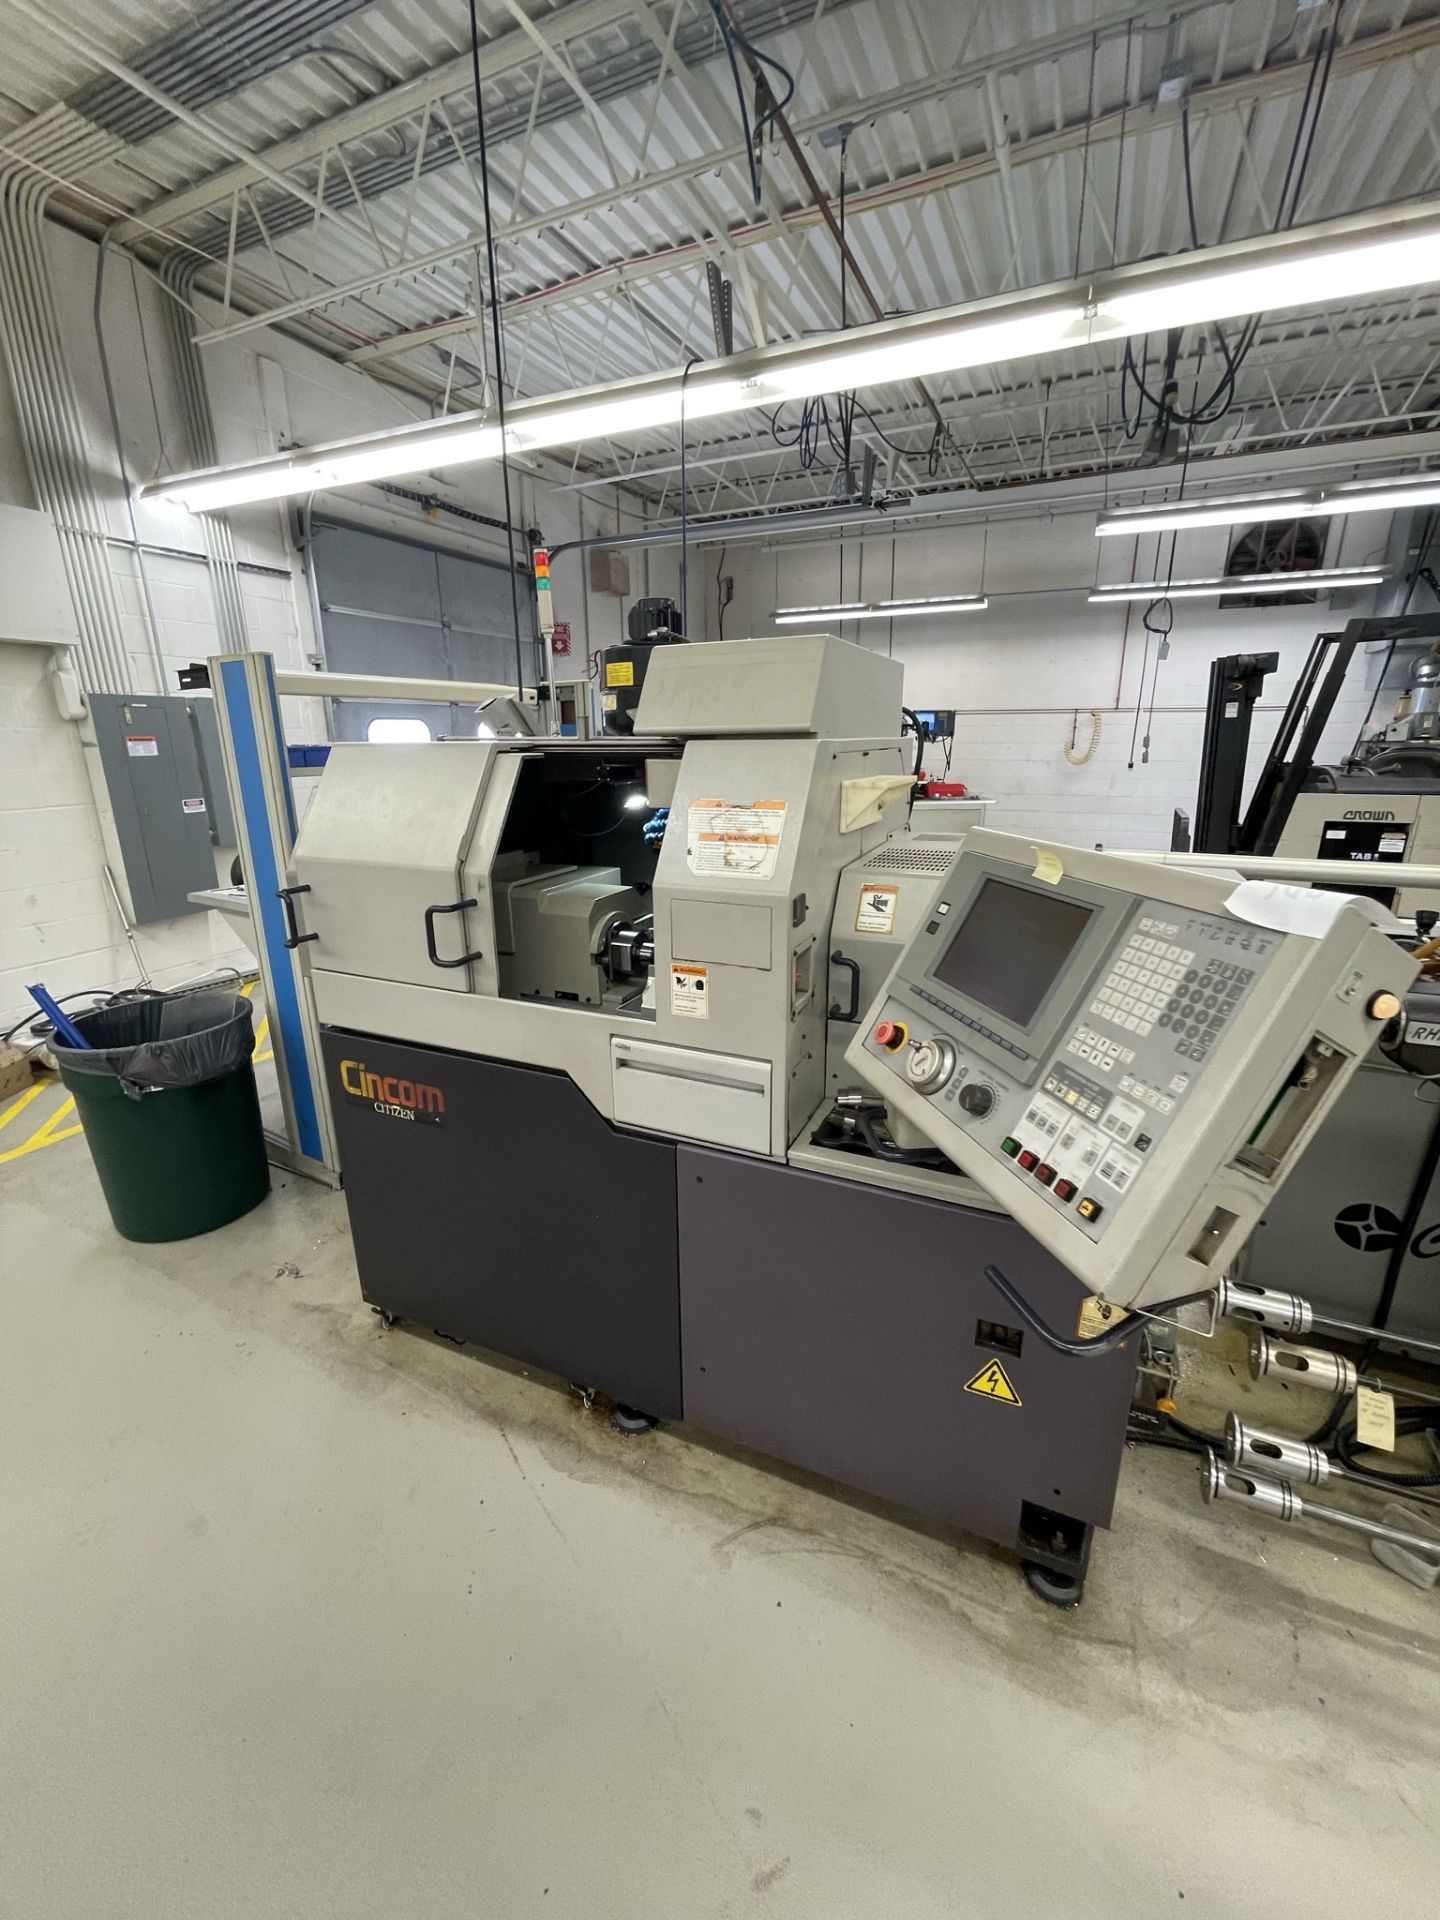 2004 Citizen Model L20 Type VIII 5 Axis Swiss Type CNC Lathe, C-Axis - Image 3 of 8